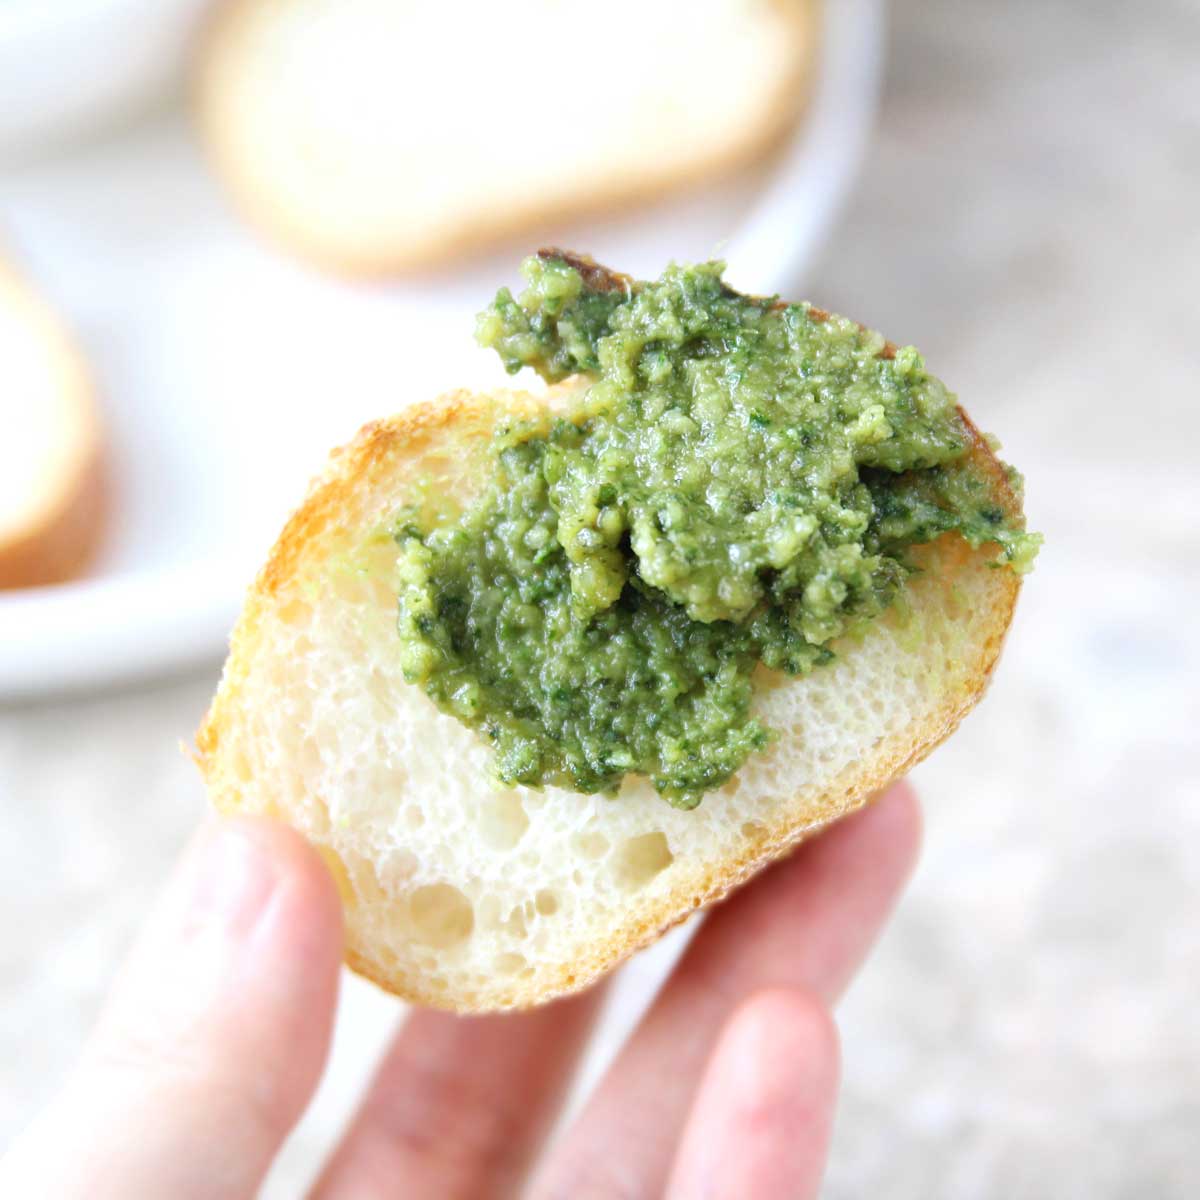 Creamy Cashew Butter Pesto (No Pine Nuts Required!) - Sweet Matcha Whipped Cream